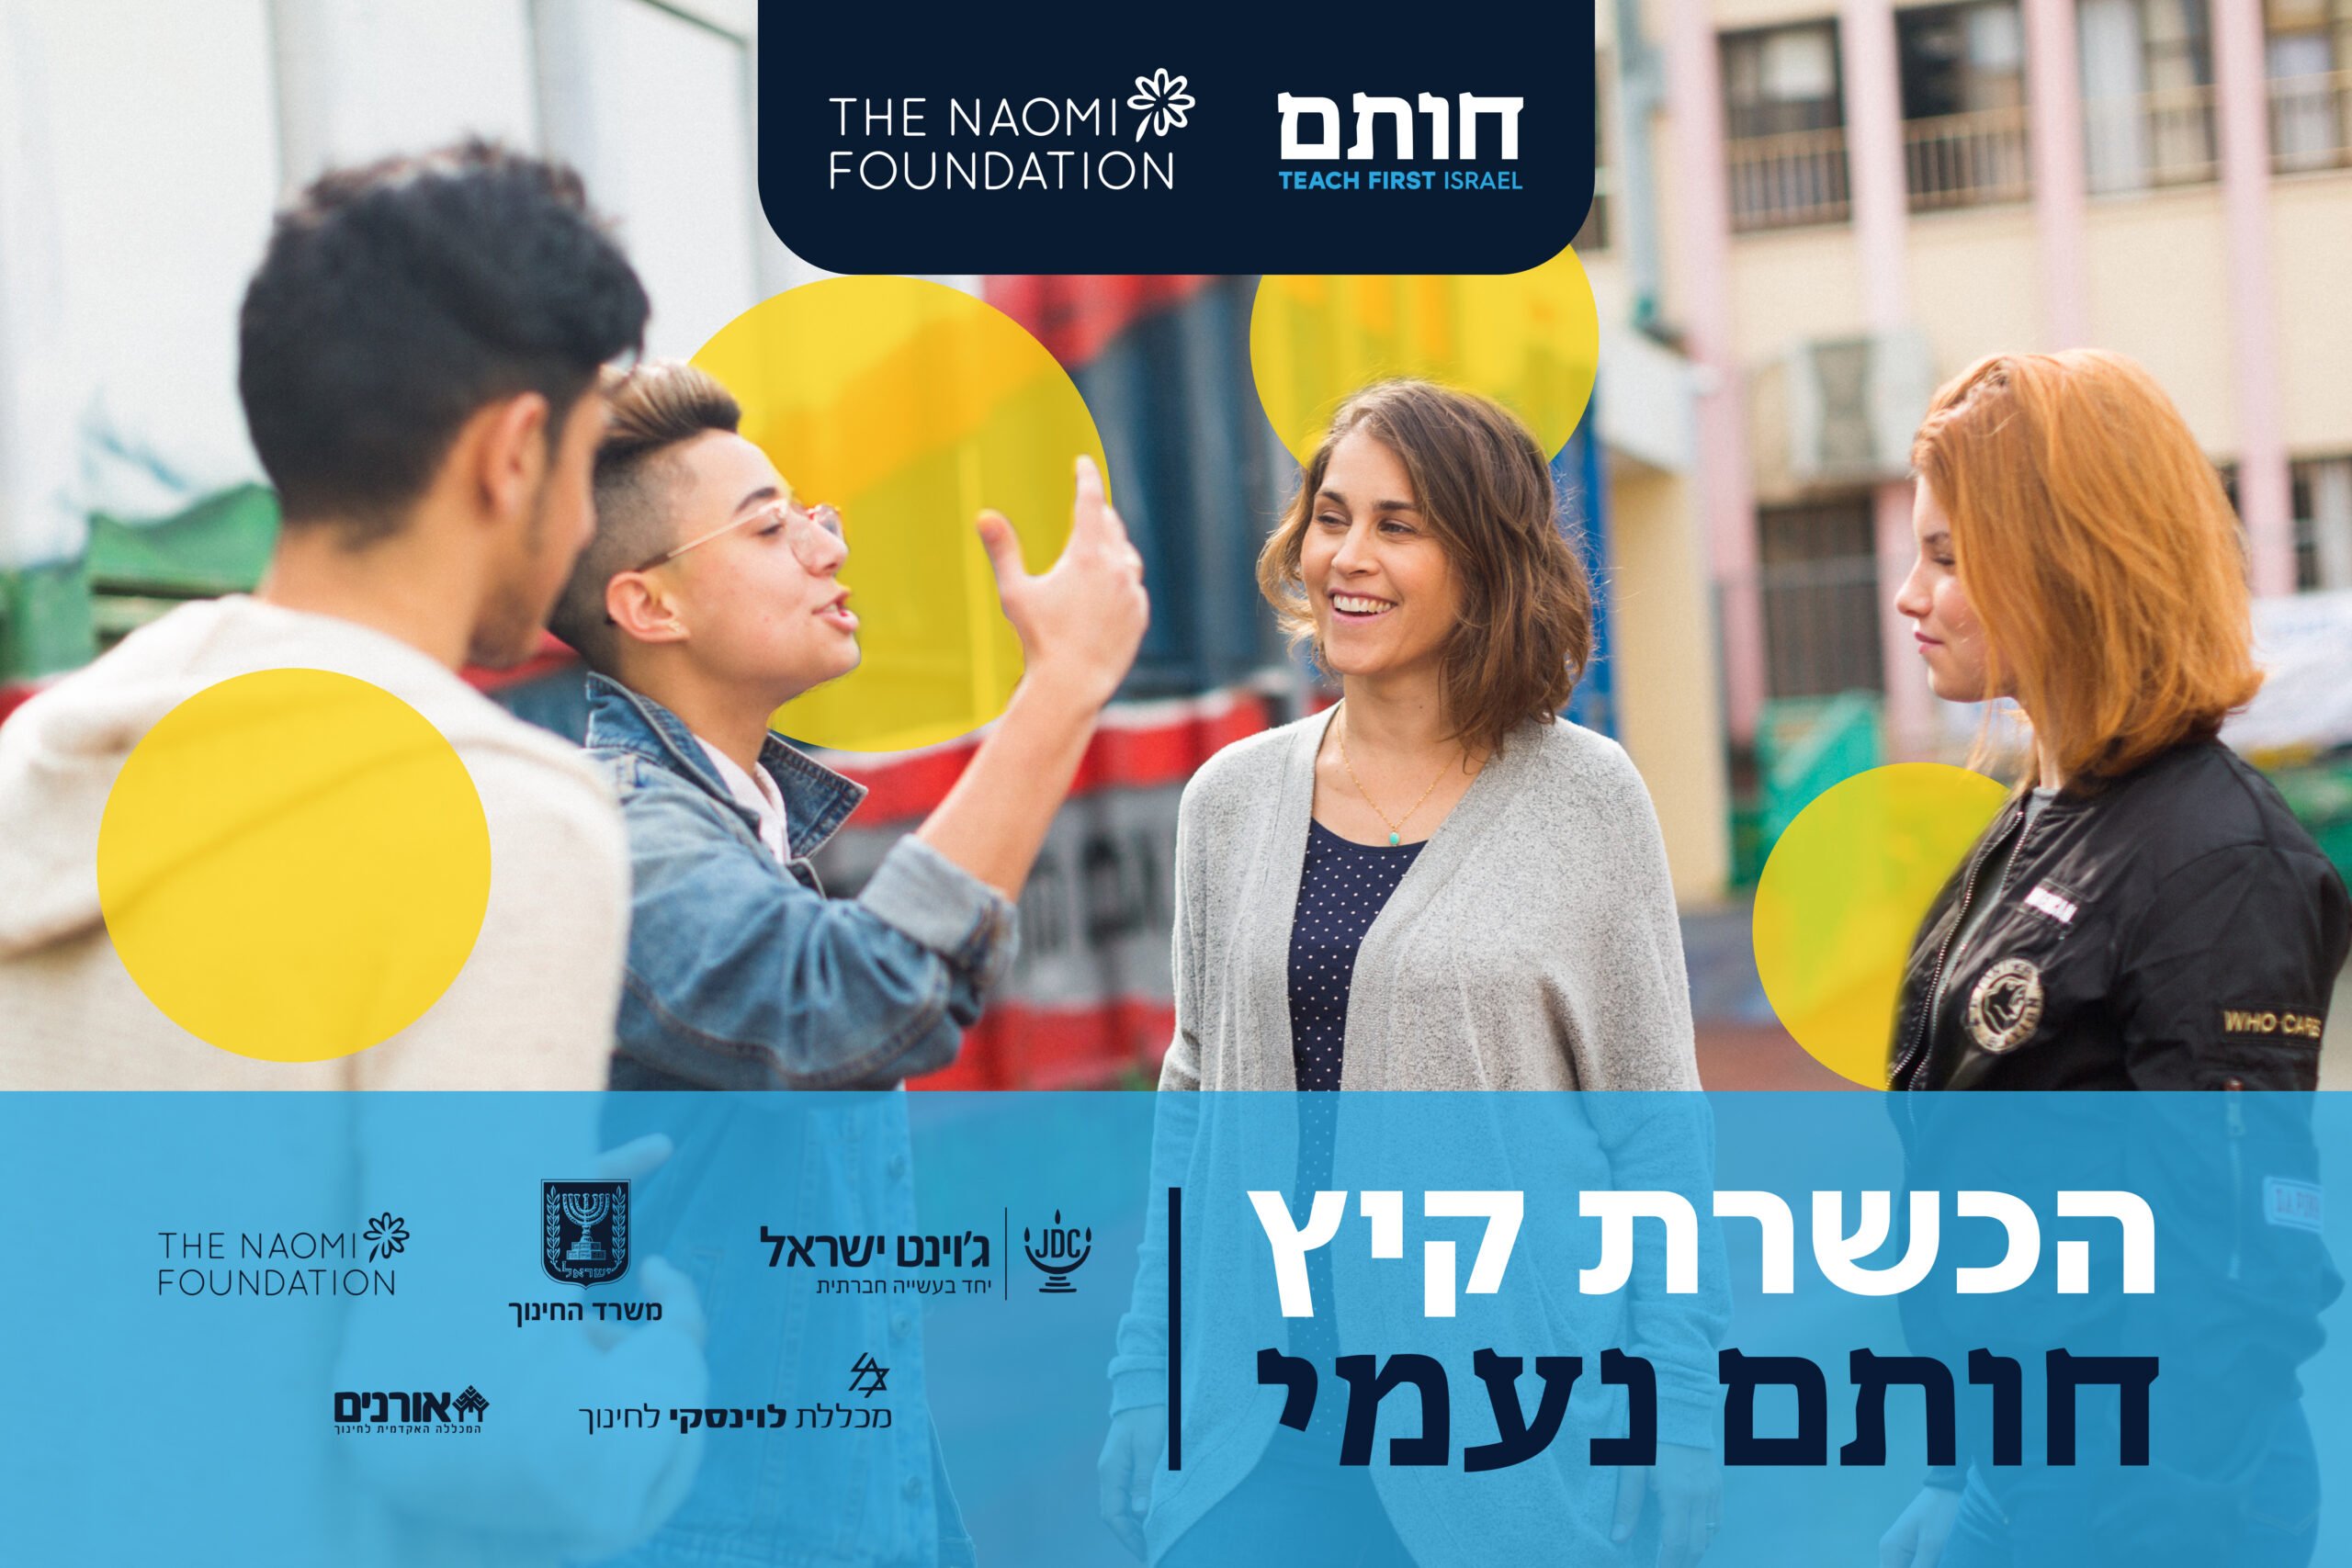 This tear shows a shot of four older students for The Naomi Foundation and Teach First Israel